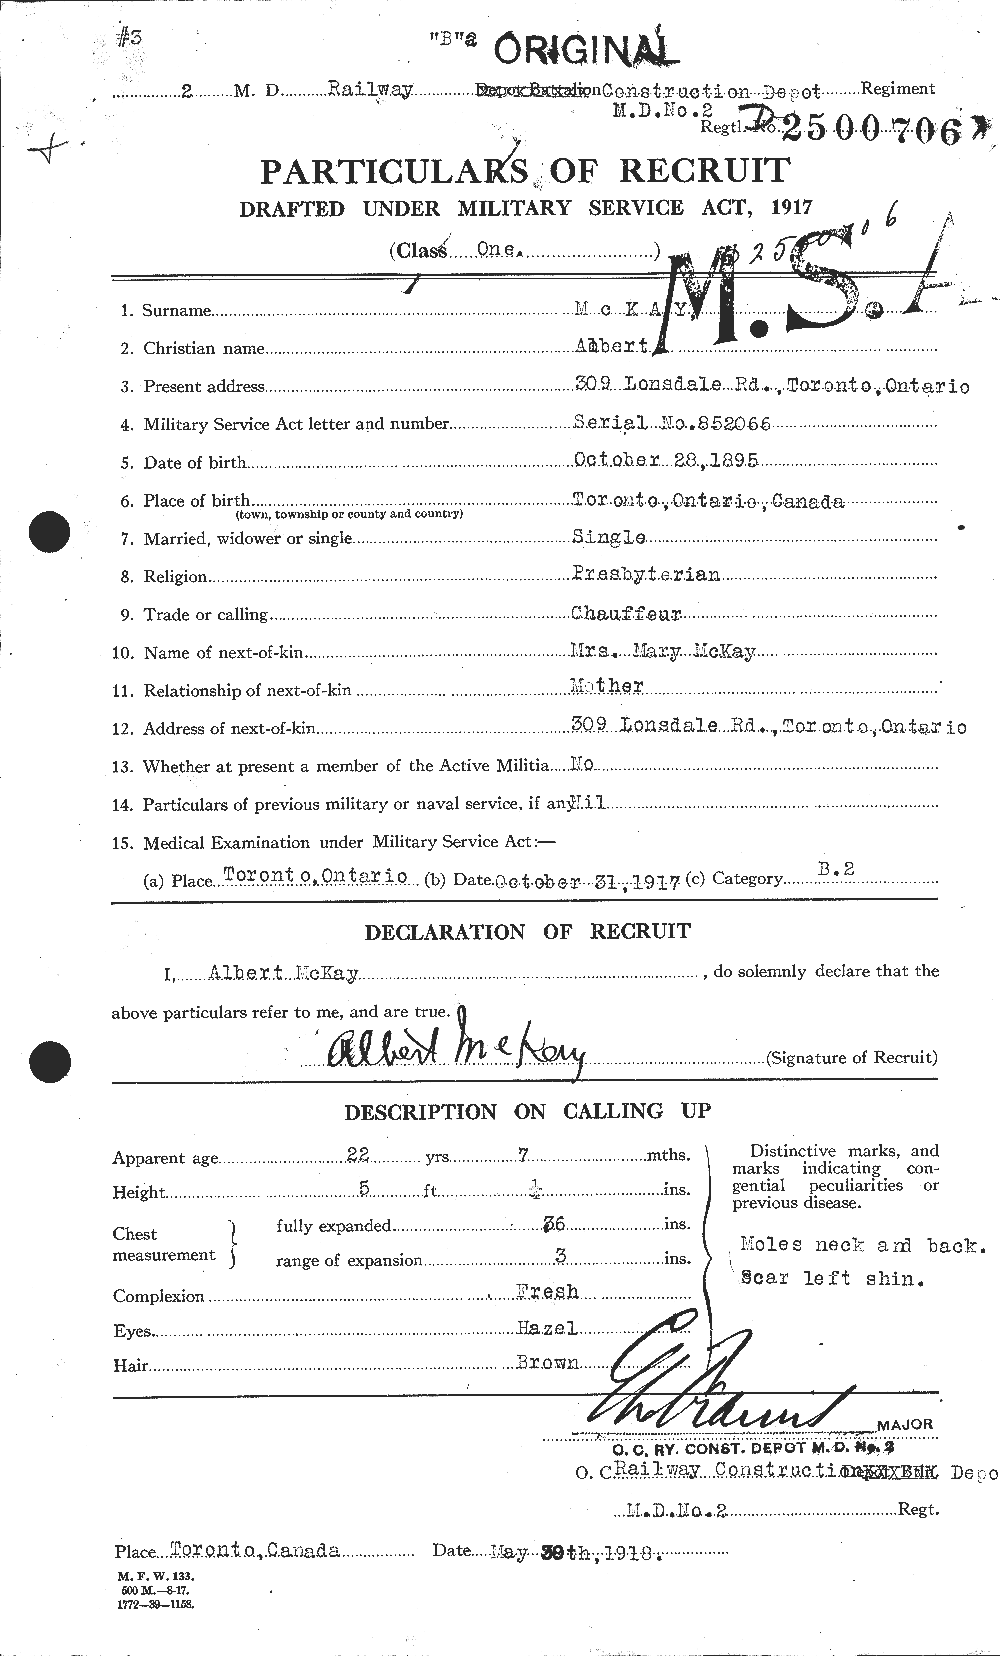 Personnel Records of the First World War - CEF 530876a